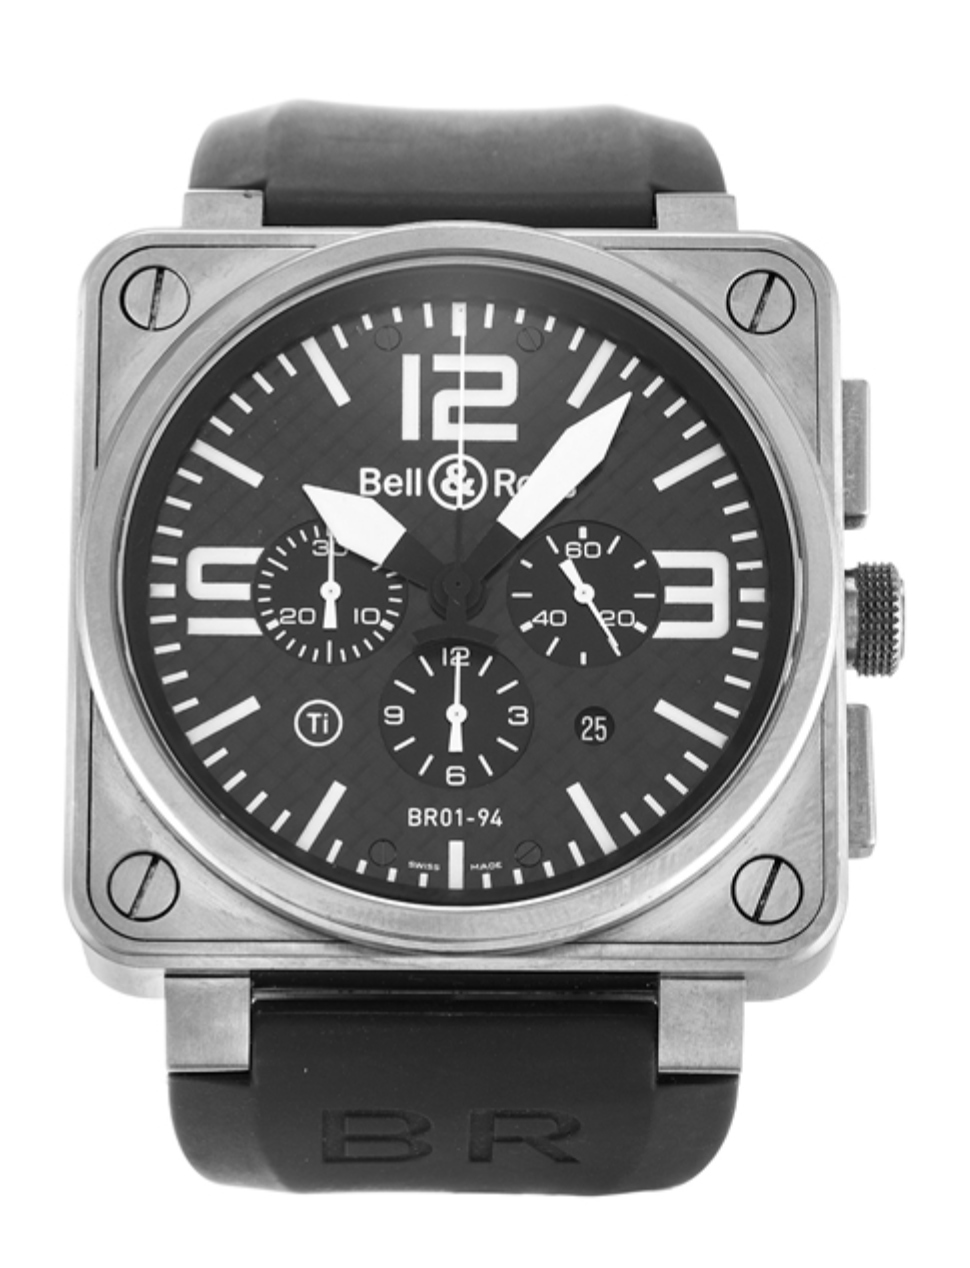 Replica Watch – Bell and Ross BR01-94 Chronograph Titanium - IP Empire Replica Watches